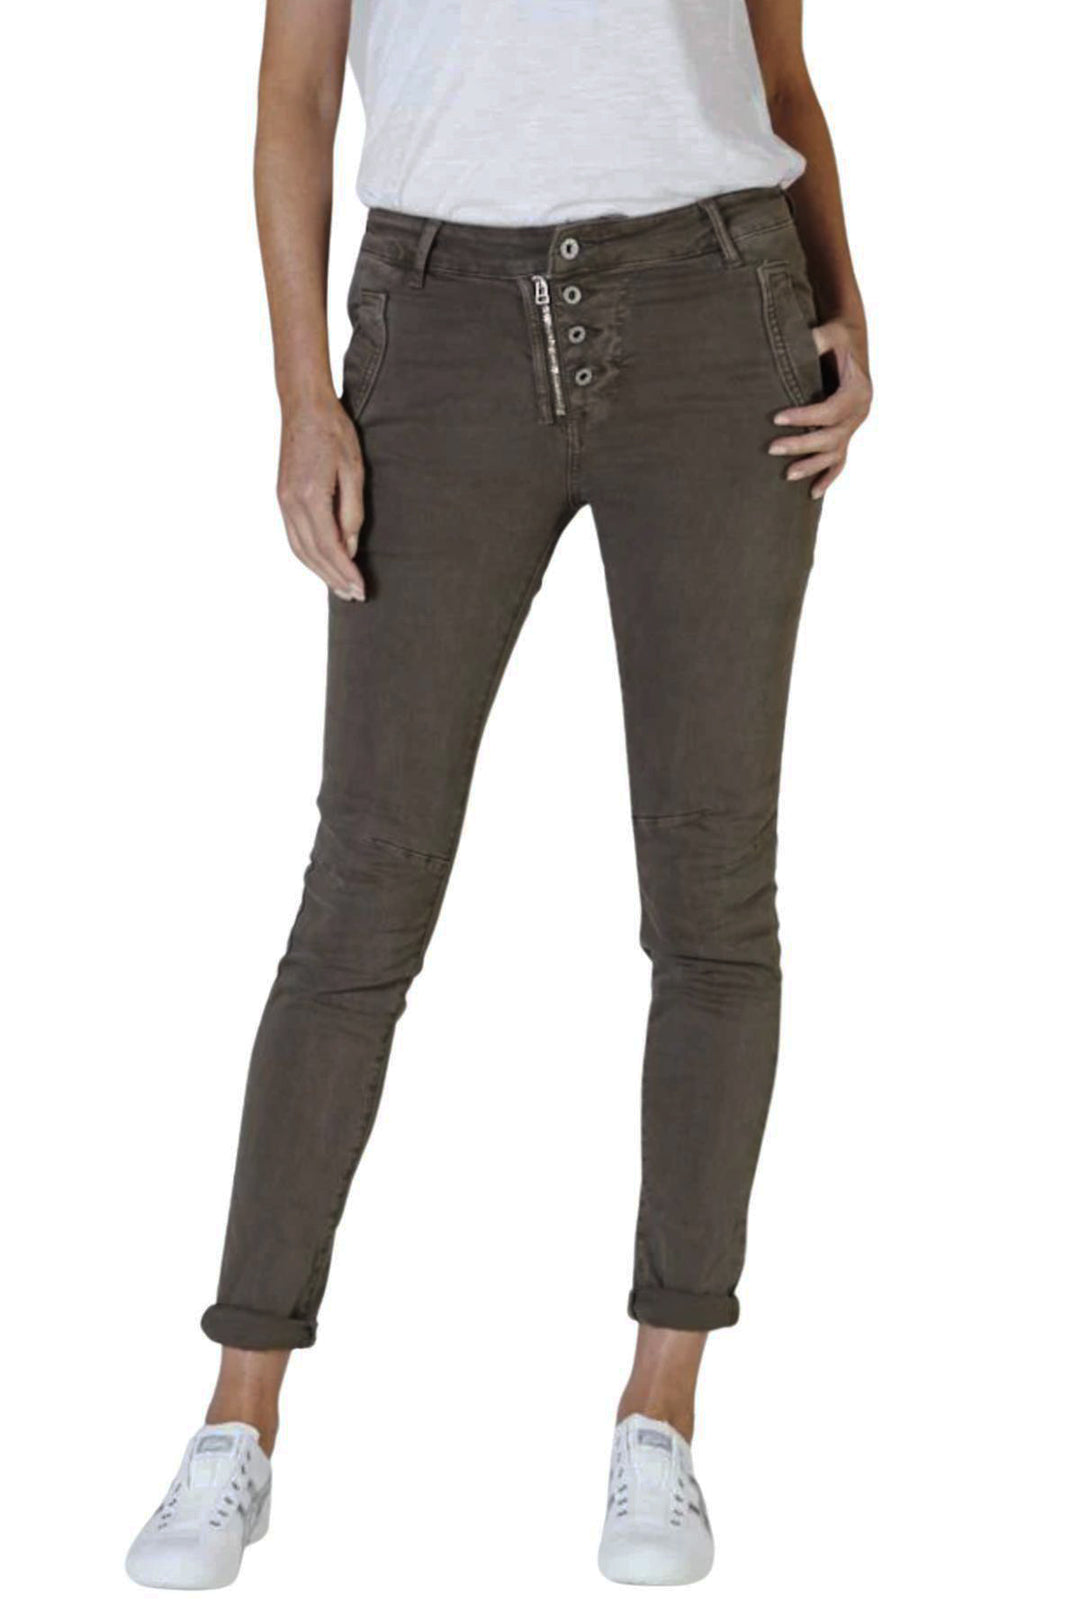 Make a statement with a difference wearing the Classic Button Jeans in chocolate by Italian Star. These denim jeans double as a casual and smart pant with an added touch of Pizazz through the zip and button detail. With a mid rise waist, pockets and tapered leg these pants are going to fit you to perfection! Brand: Italian Star Style Code: 8123 Colour: Chocolate Material: 98% Cotton 2% Elastane Care: Machine wash Zip and button fly front Side pockets Zip back pockets Seam detail at knees Designed to fade